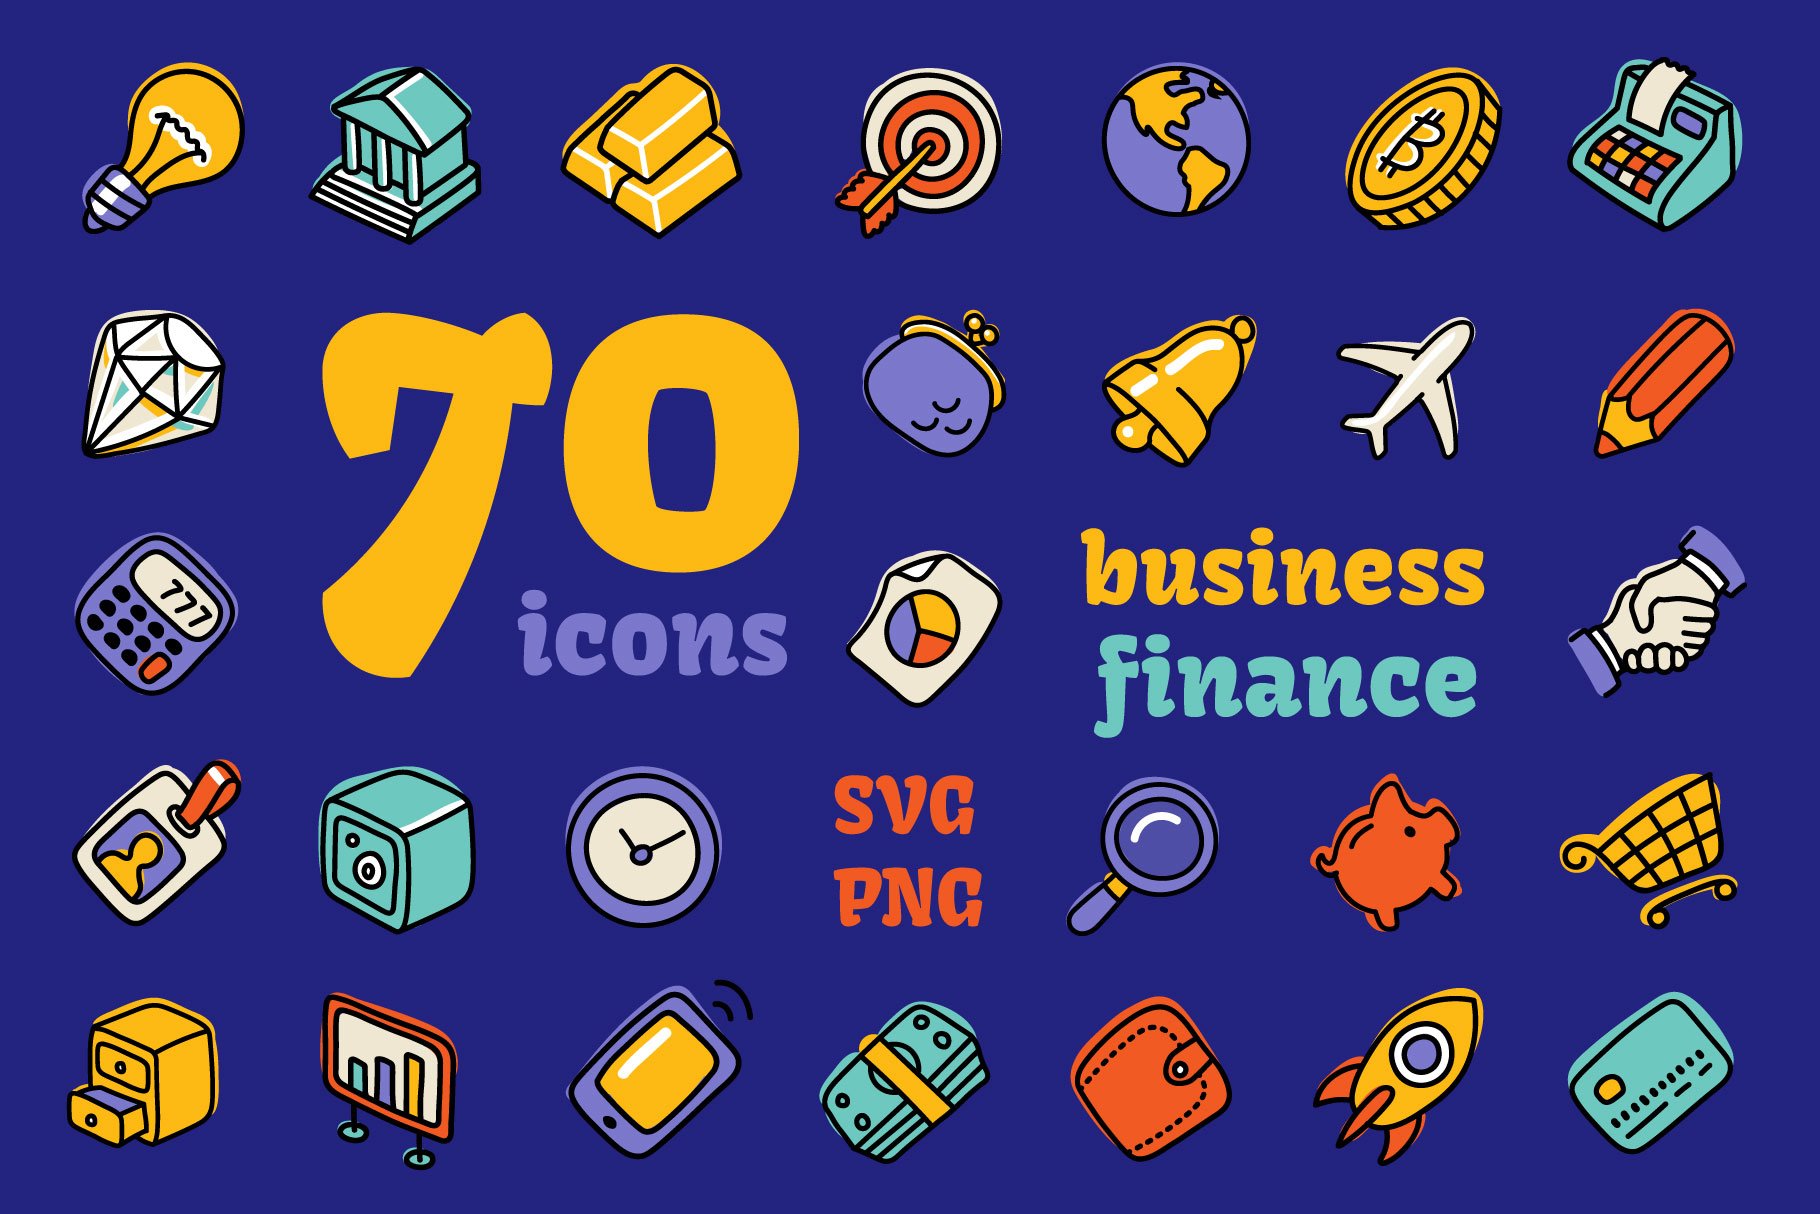 Business&Finance Hand Drawn Icons cover image.